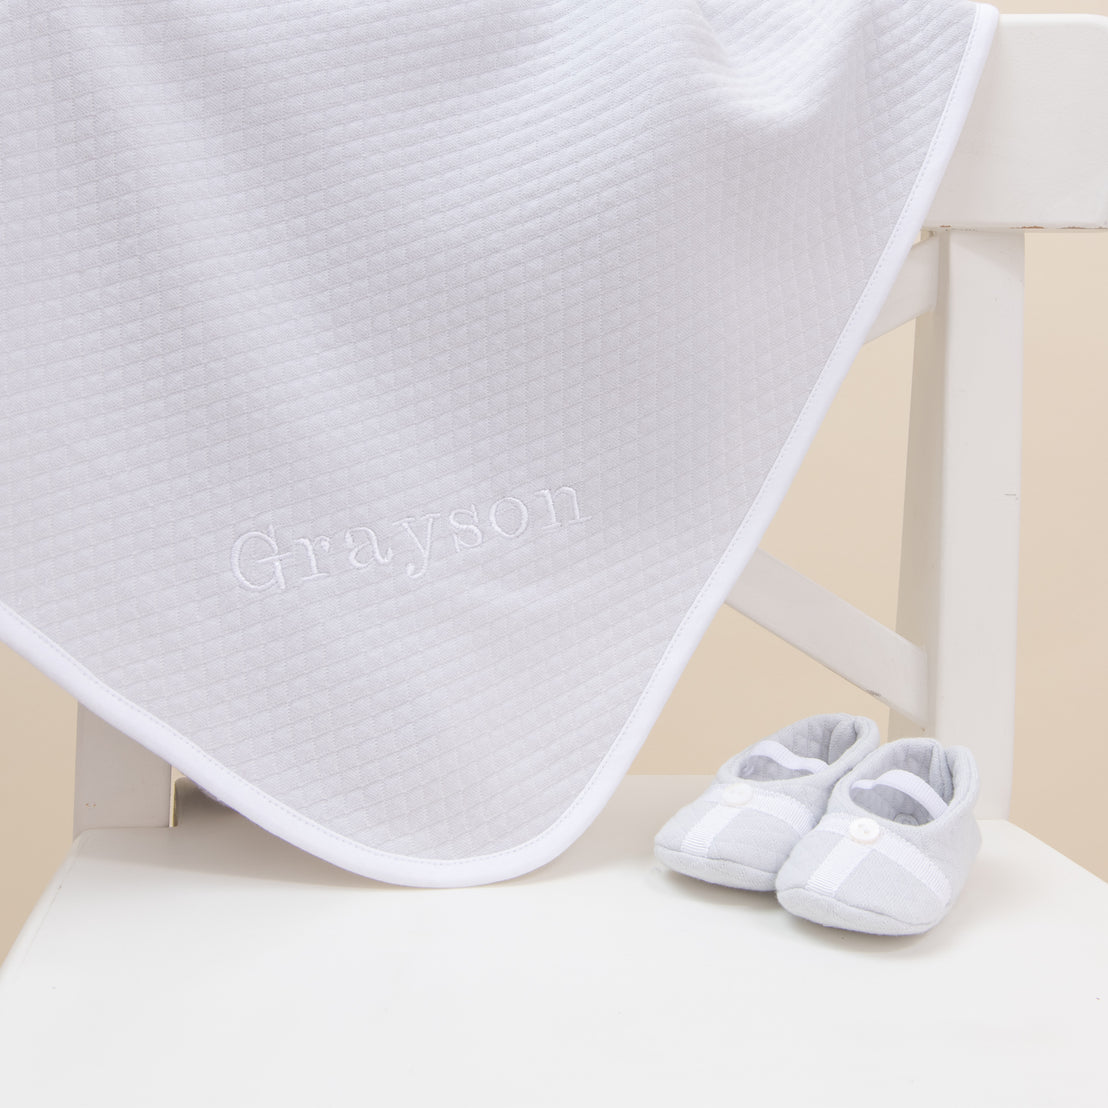 Flat lay photo of the Grayson Personalized Blanket with the Grayson Trim Booties.